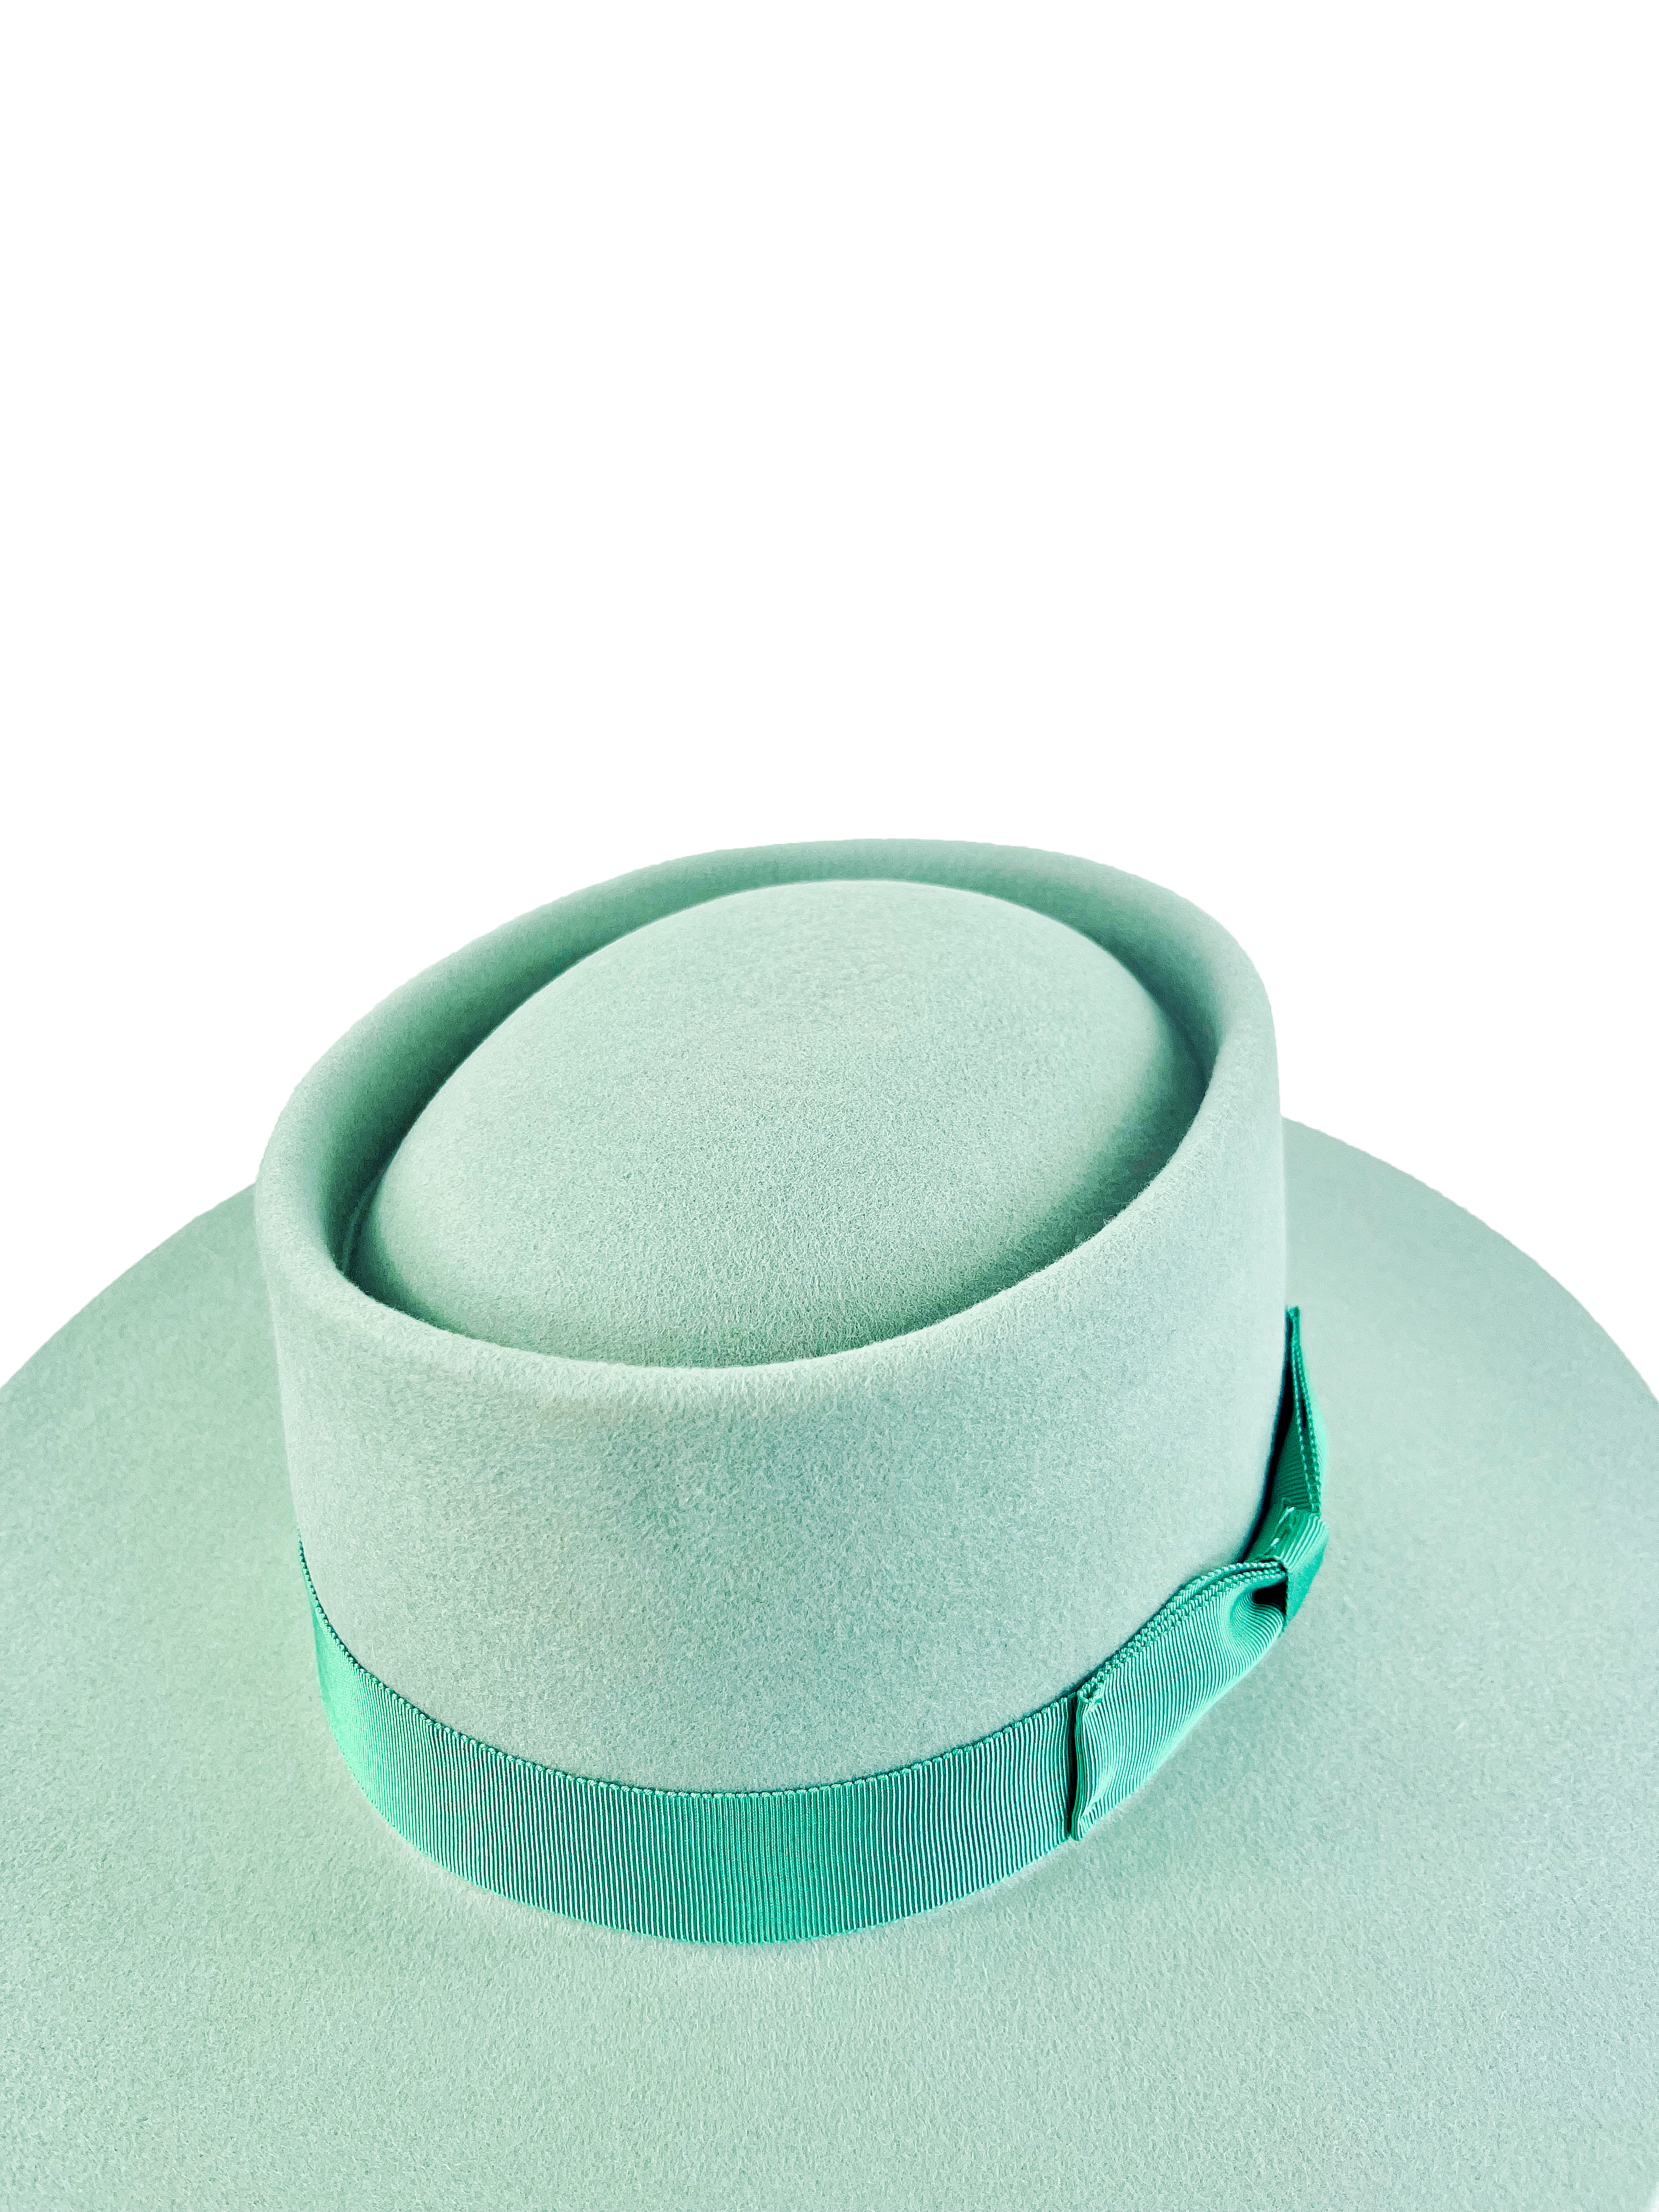 Kayo Boater Hat in Mint Green